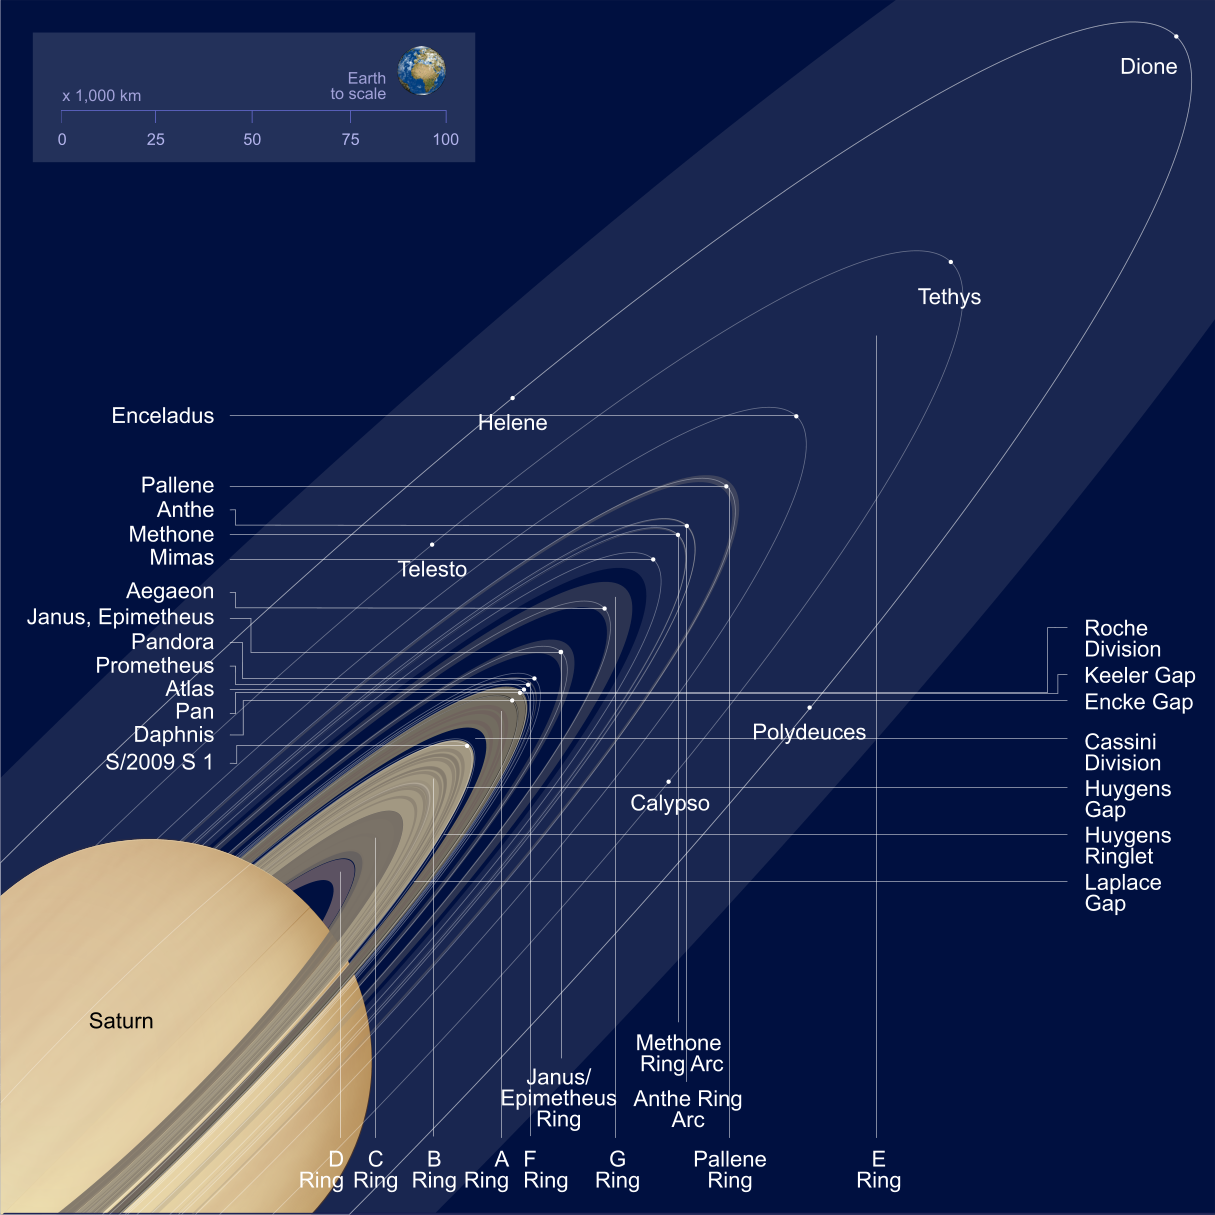 Saturn, its rings and inner moons